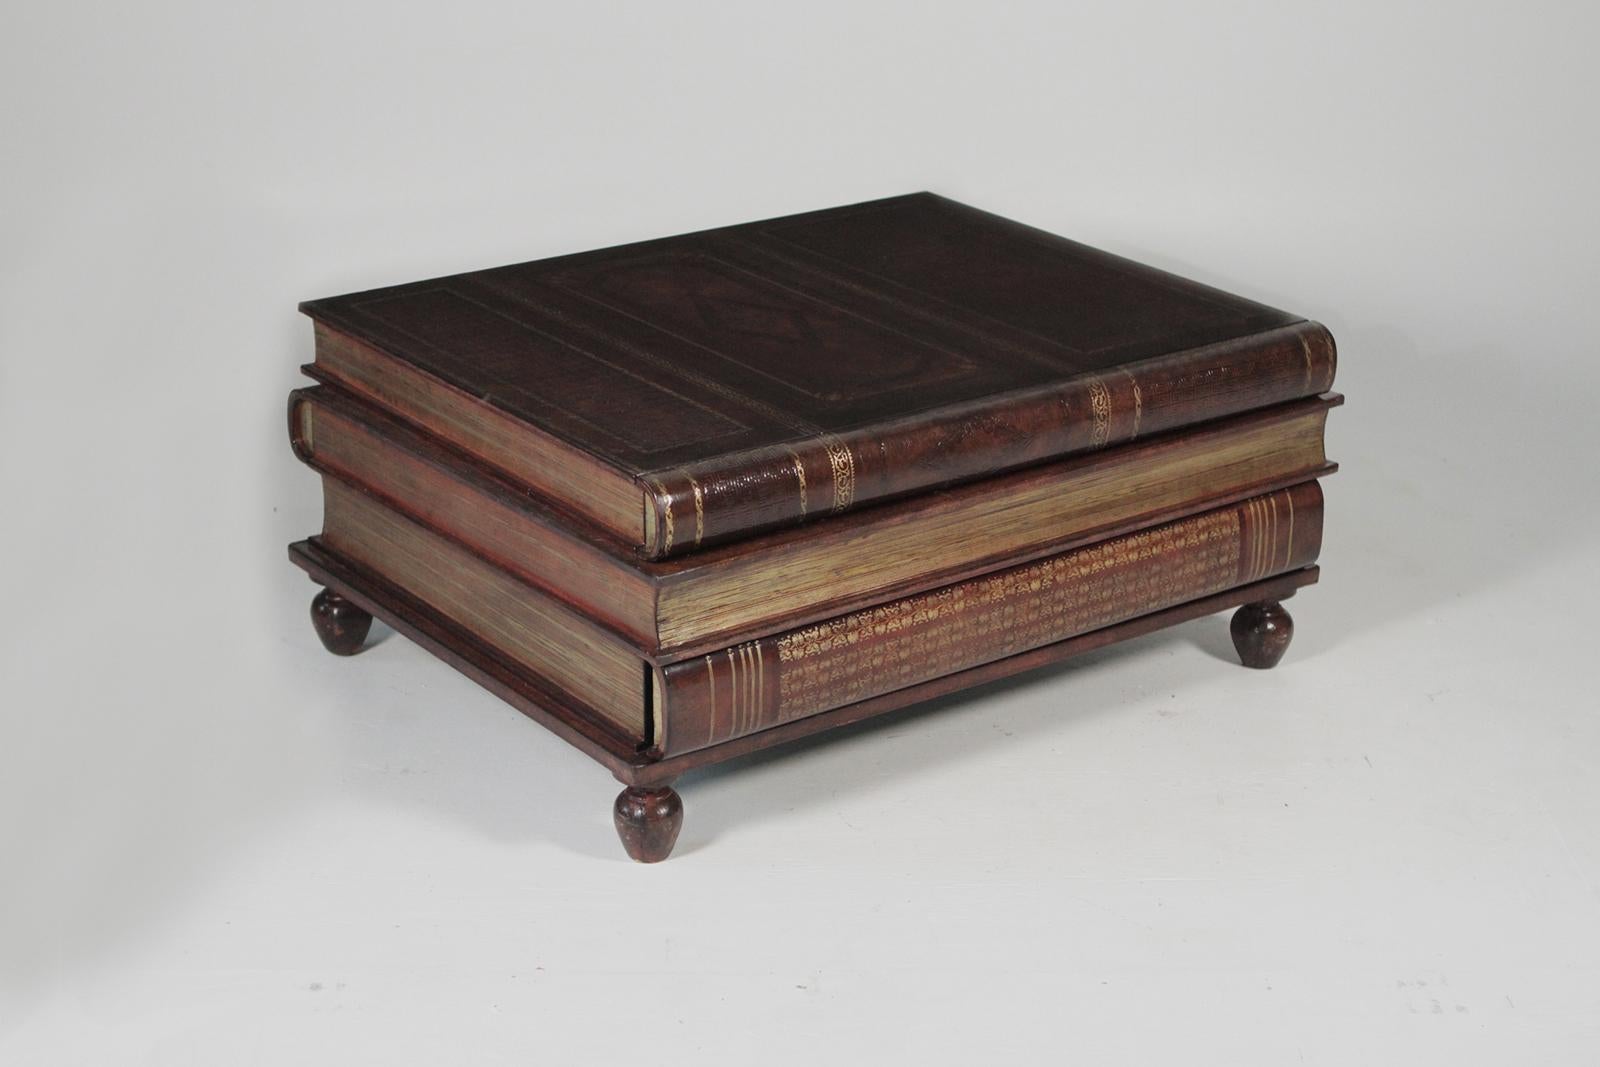 Maitland-Smith stack book coffee table. The leather wrapped surface with three concealed drawers. Each book is a drawer with on the front and two on the back. The hand tooled leather with gilt edges is in a warm cognac color. This piece is in